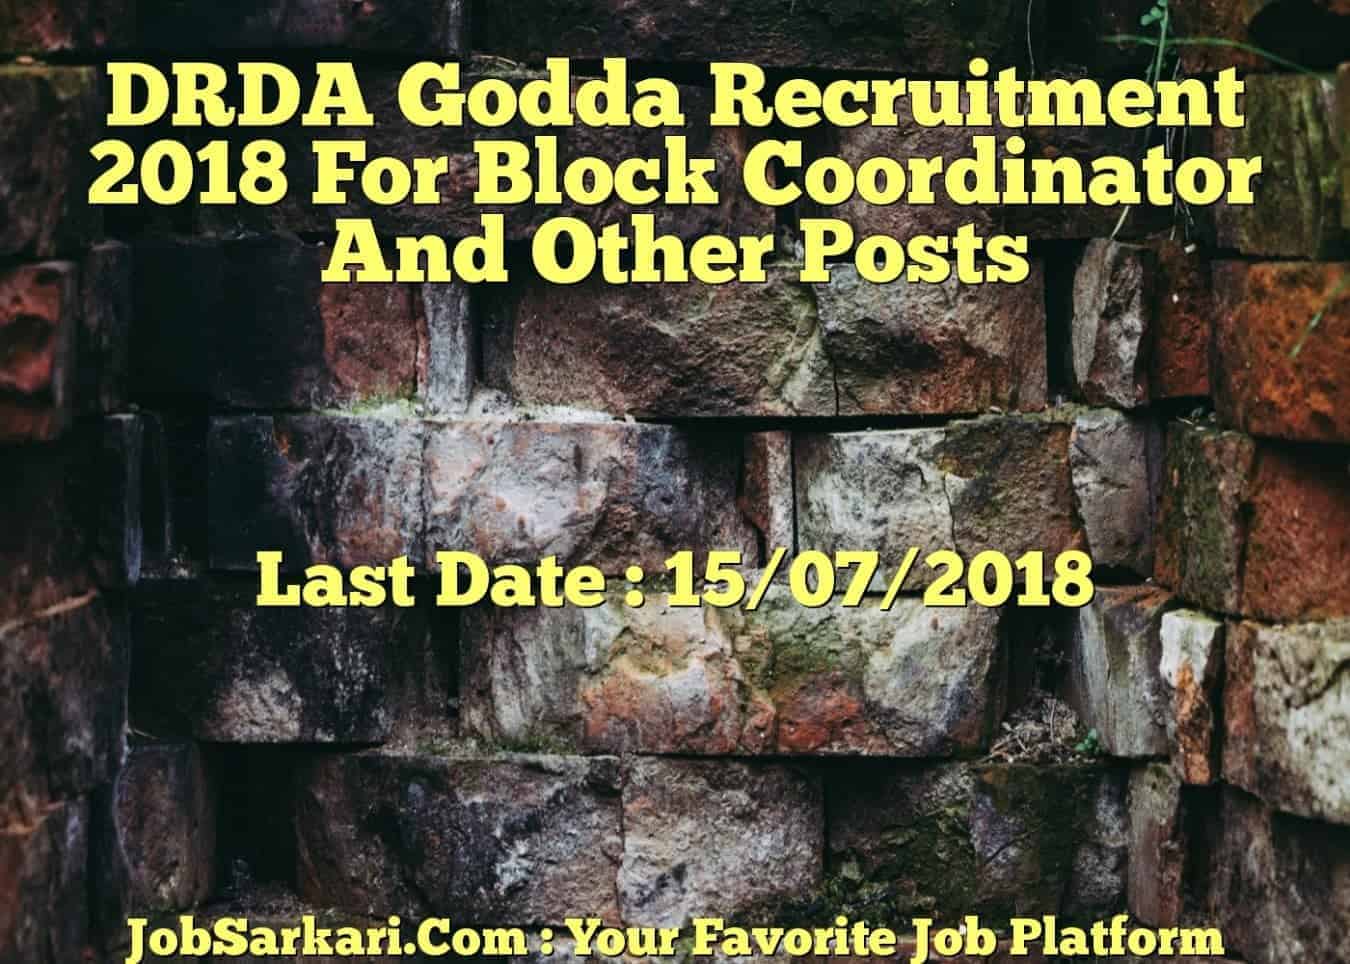 DRDA Godda Recruitment 2018 For Block Coordinator And Other Posts